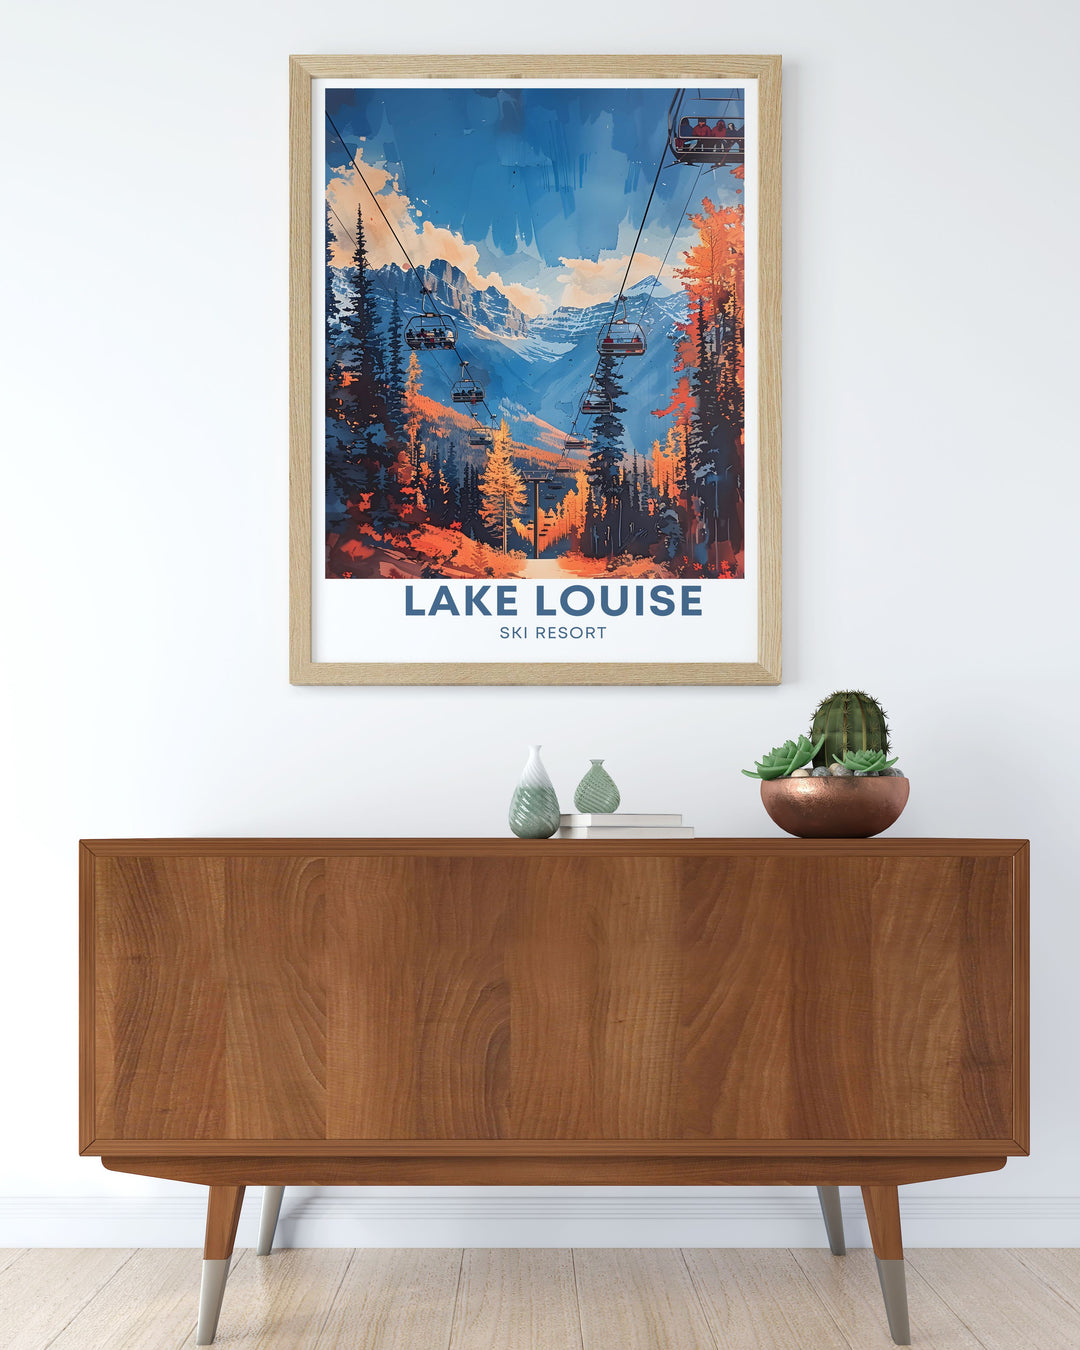 This travel poster showcases the thrilling ski experience at Lake Louise Ski Resort, with a focus on the Top of the World Express lift. The vibrant depiction emphasizes the excitement and breathtaking views available to visitors.